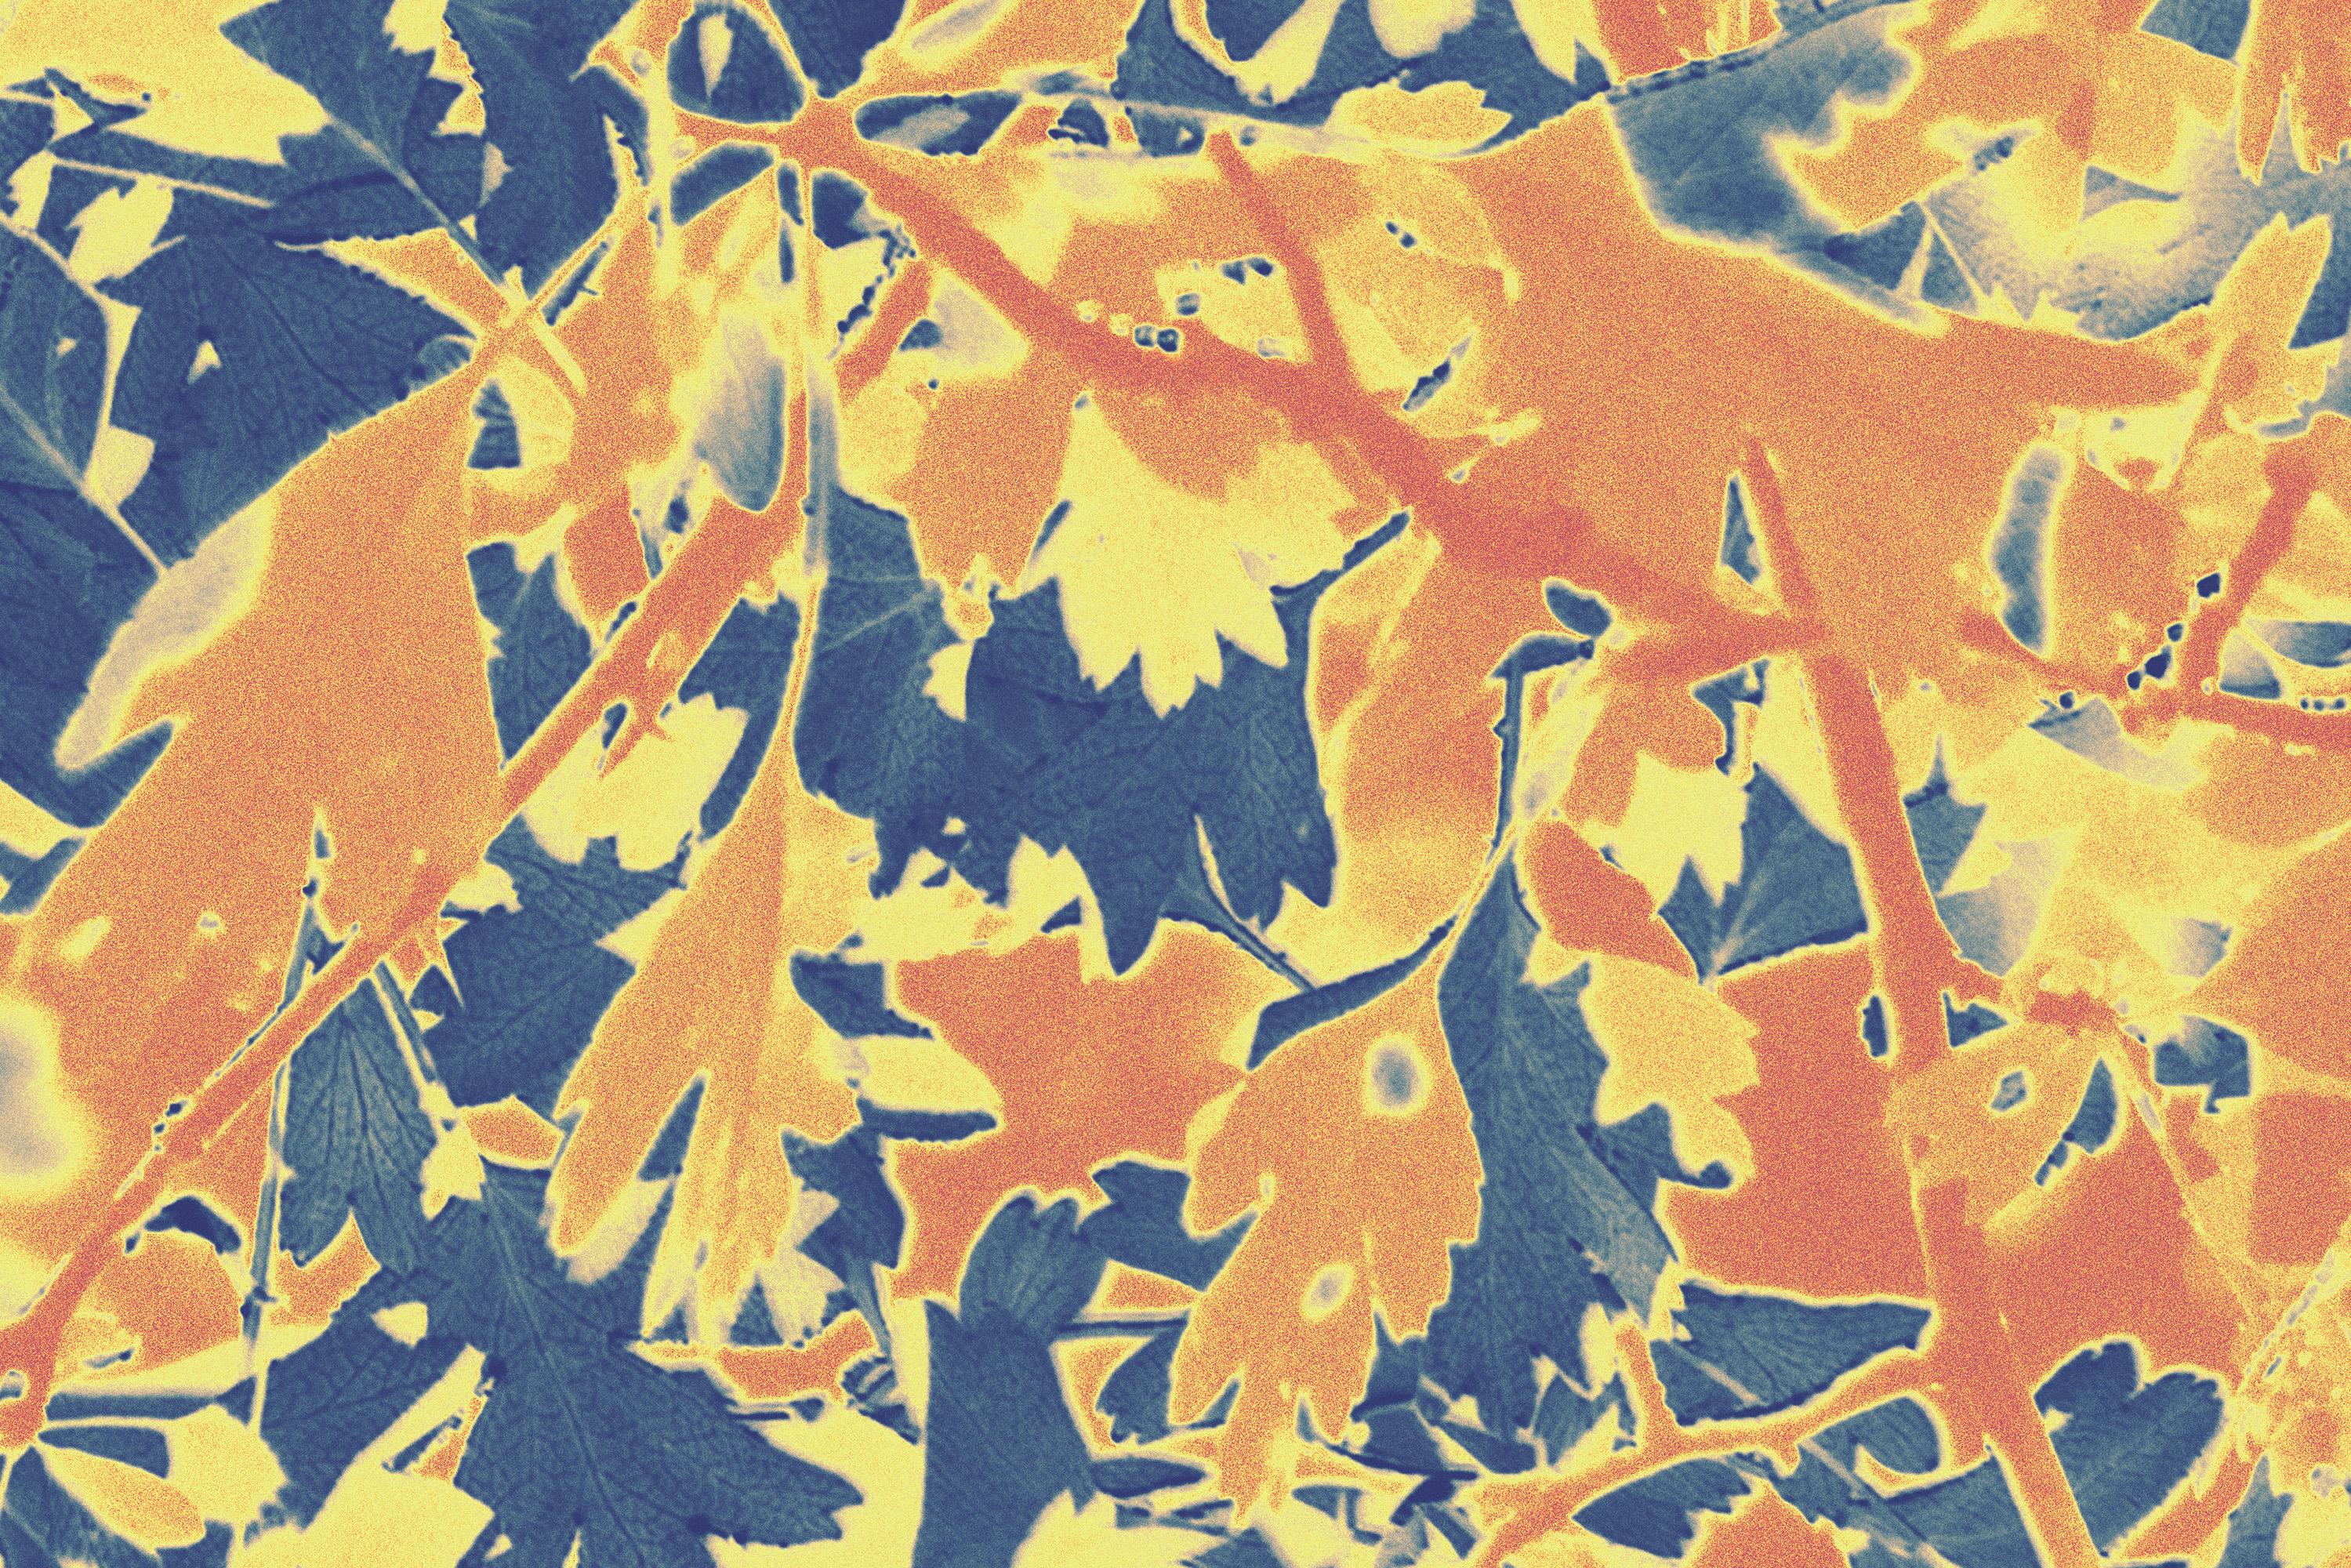 Forest Embers, Giclée Print Diptych Landscape, Warm Tons Abstract Autumn Leaves  For Sale 5